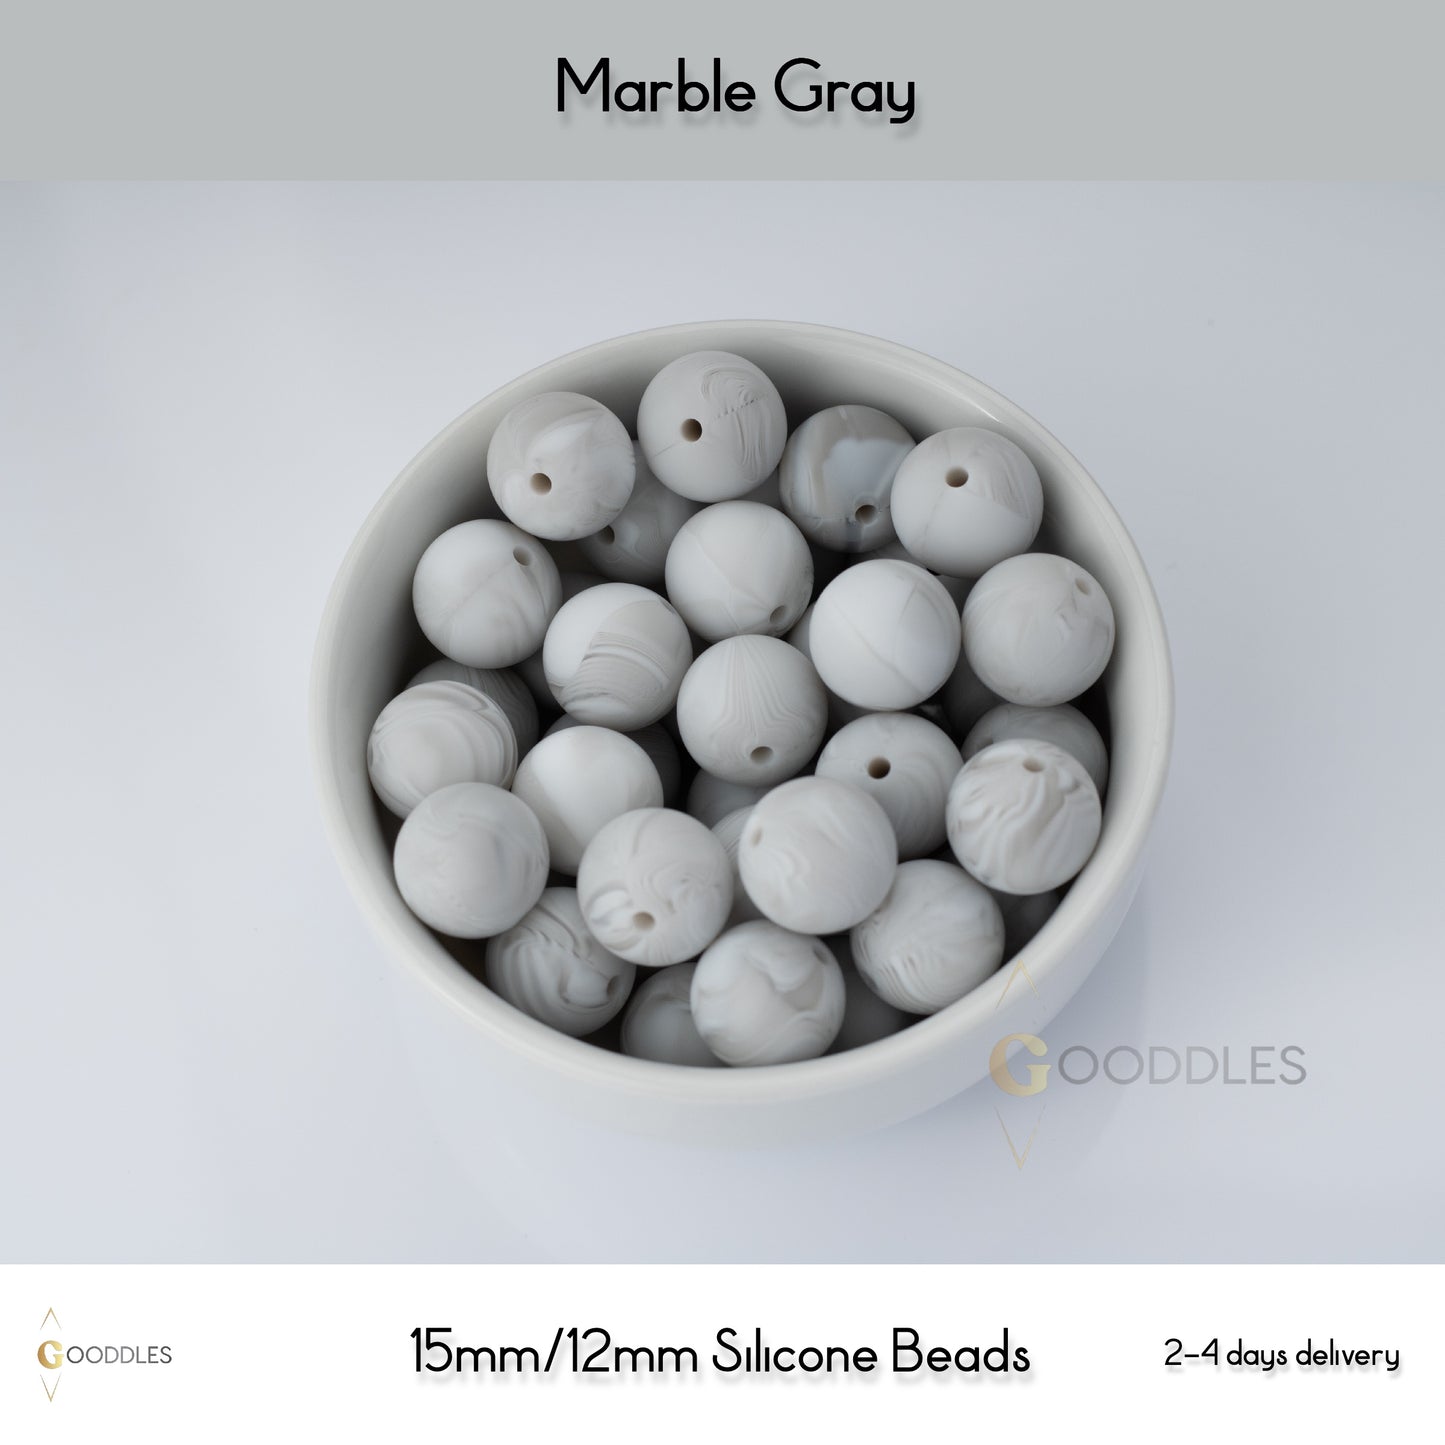 5pcs, Marble Gray Silicone Beads Round Silicone Beads